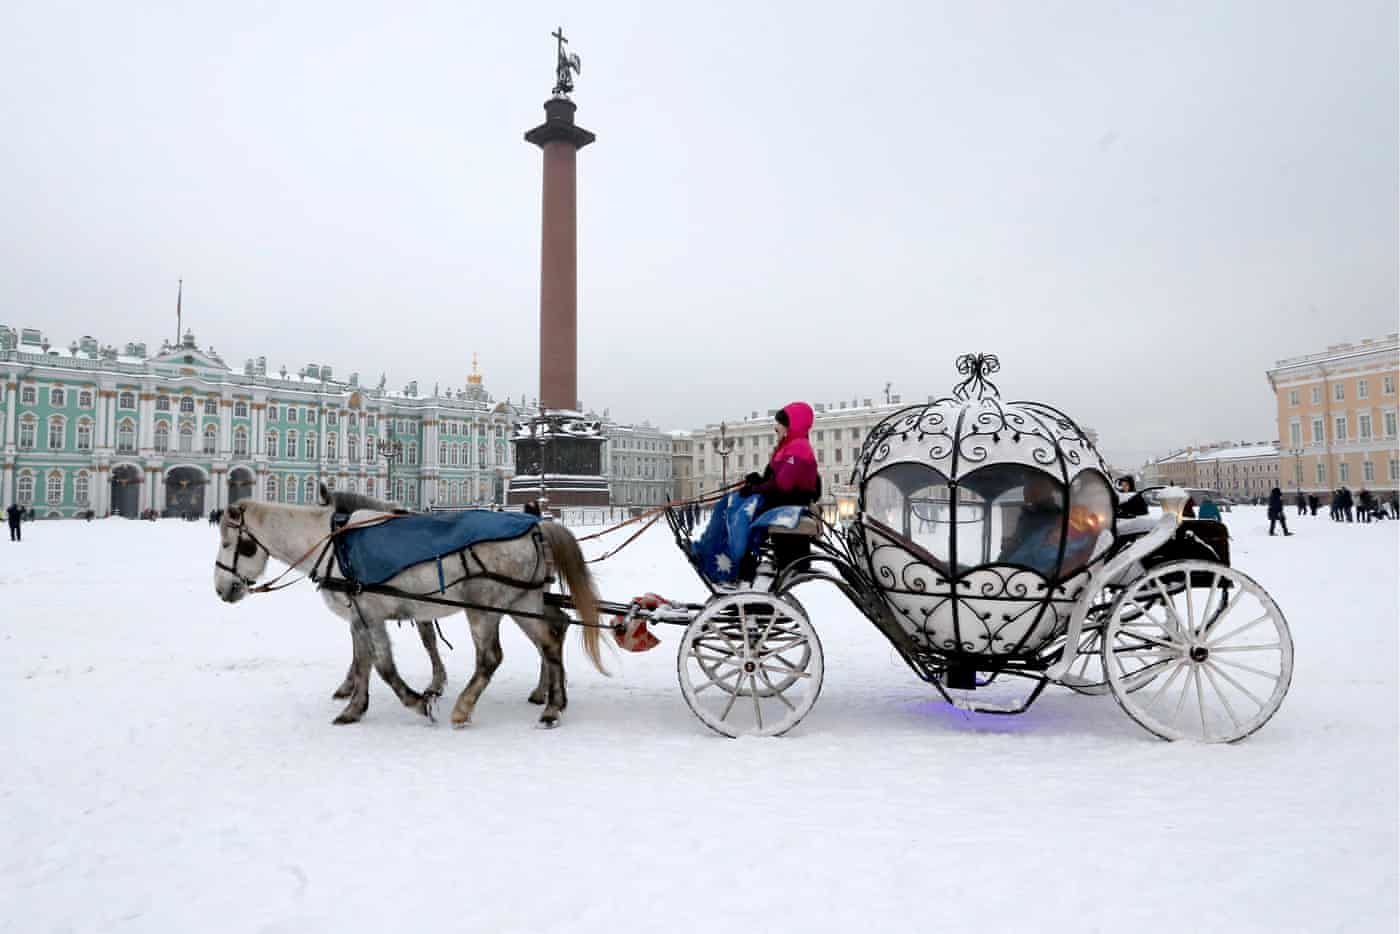 A horse-drawn carriage in Dvortsovaya (Palace) Square near the Winter Palace St Petersburg, Russia